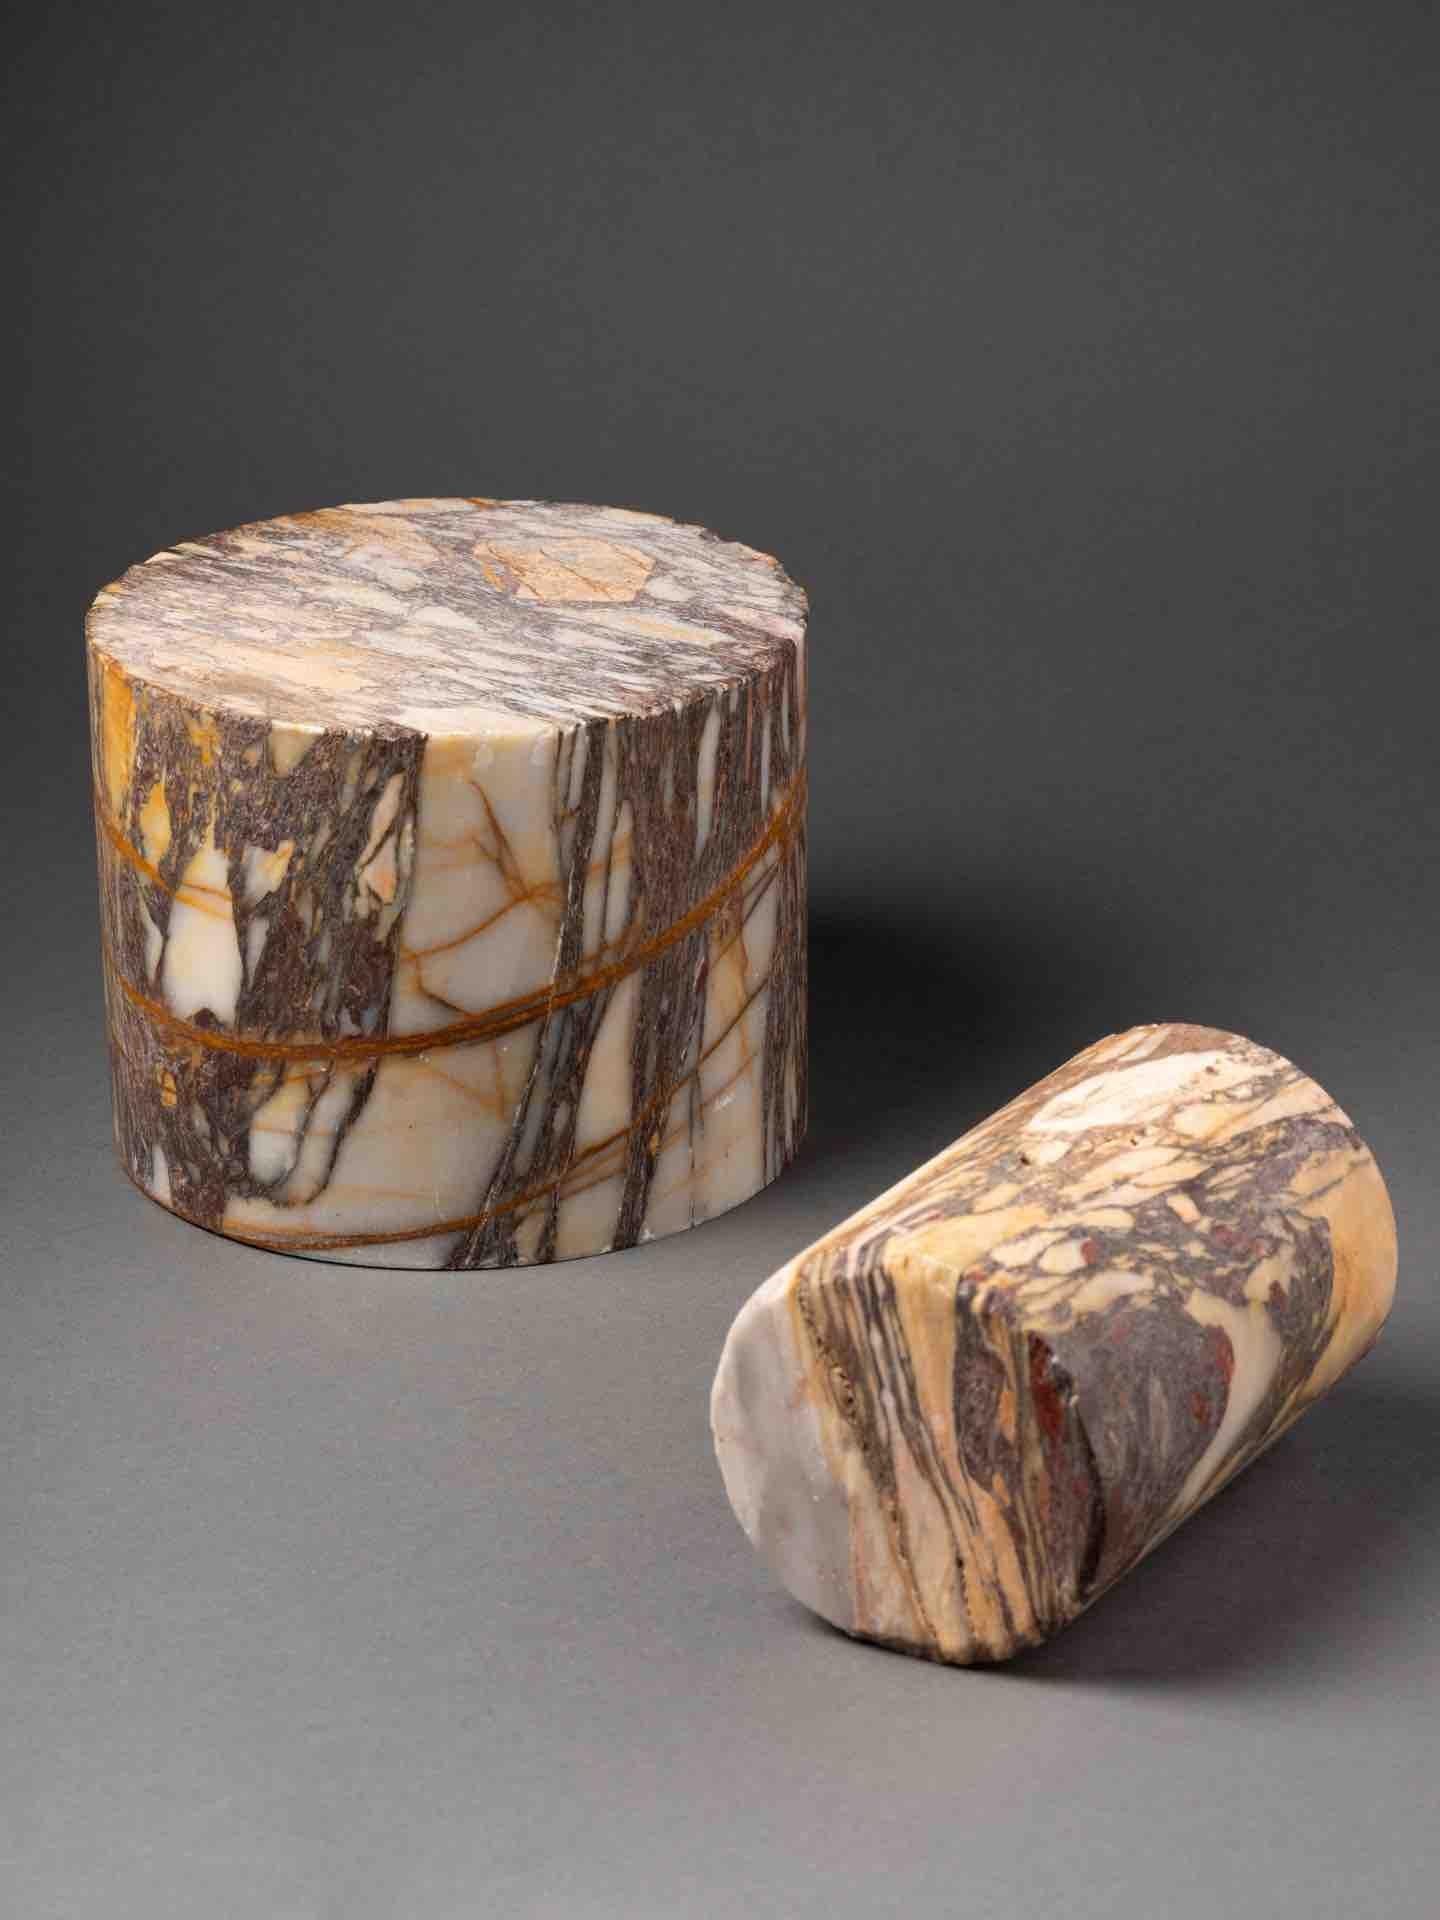 Two cylindrical specimens in Breccia Skyros Marble or Settebassi

Those two cylindrical specimens are perfect to serve as bookends or to presents works of art. 
The name comes from the stone extracted in ancient times on the island of Skyros, North